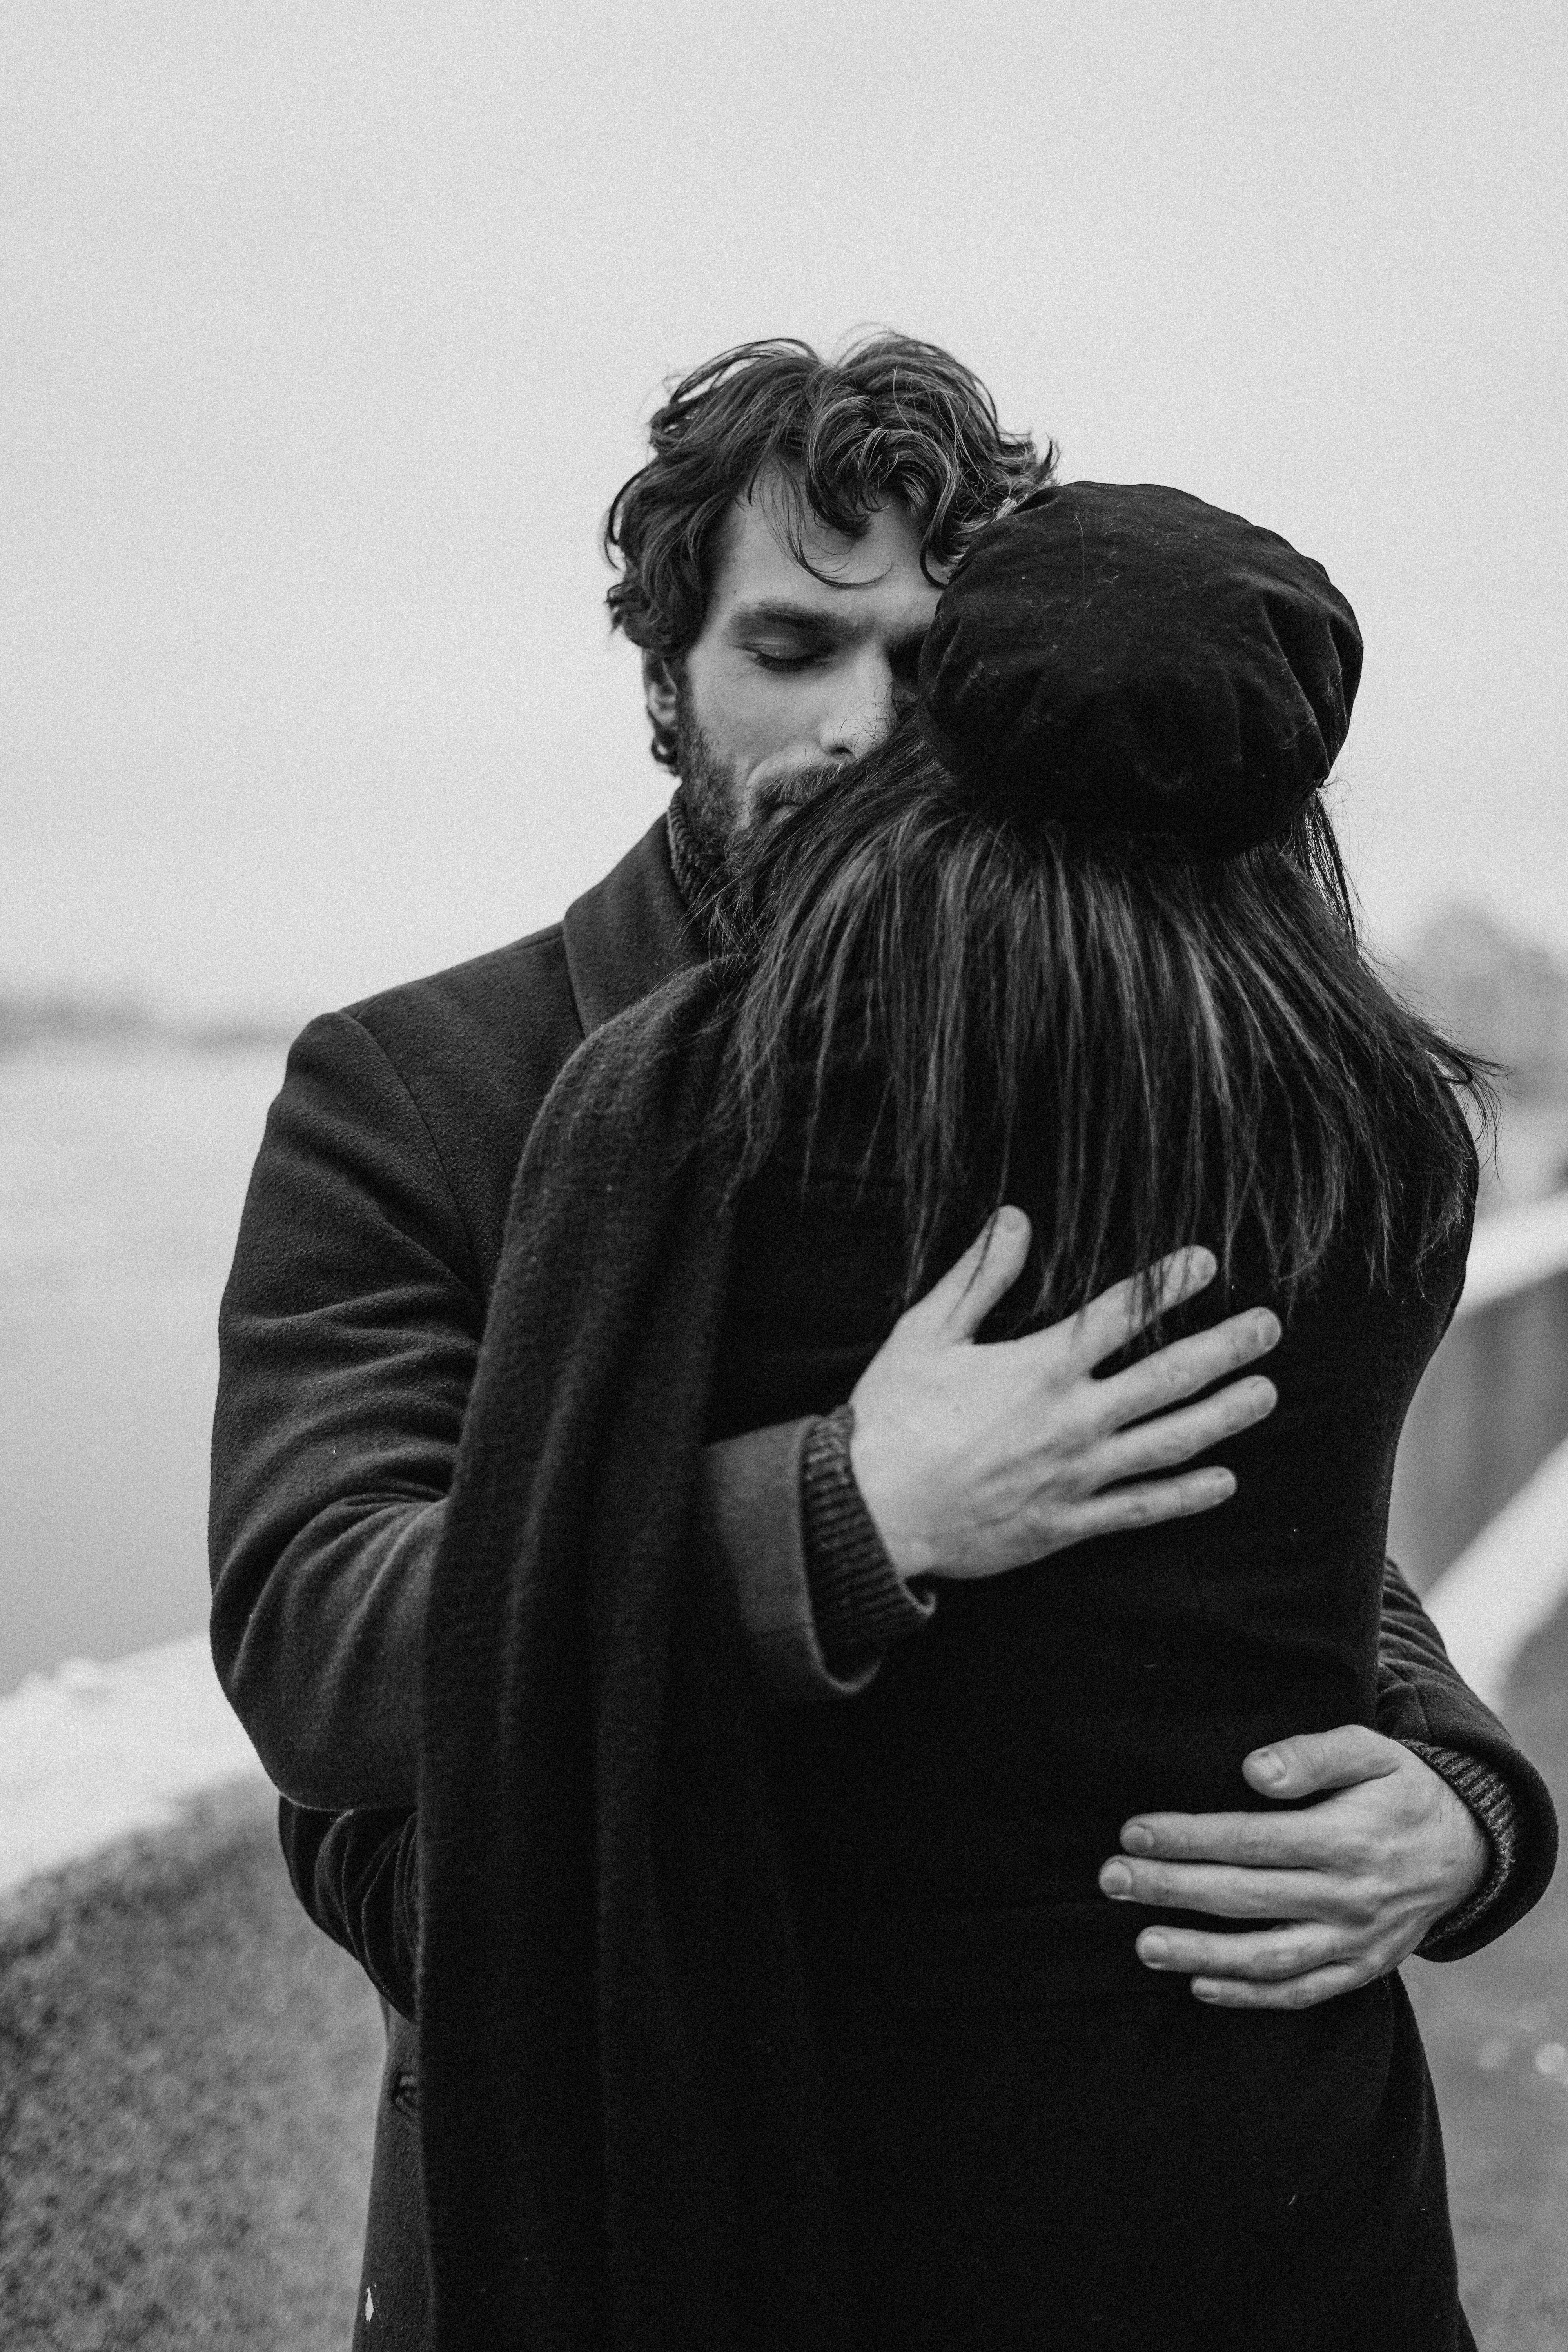 A man and woman hugging | Source: Pexels